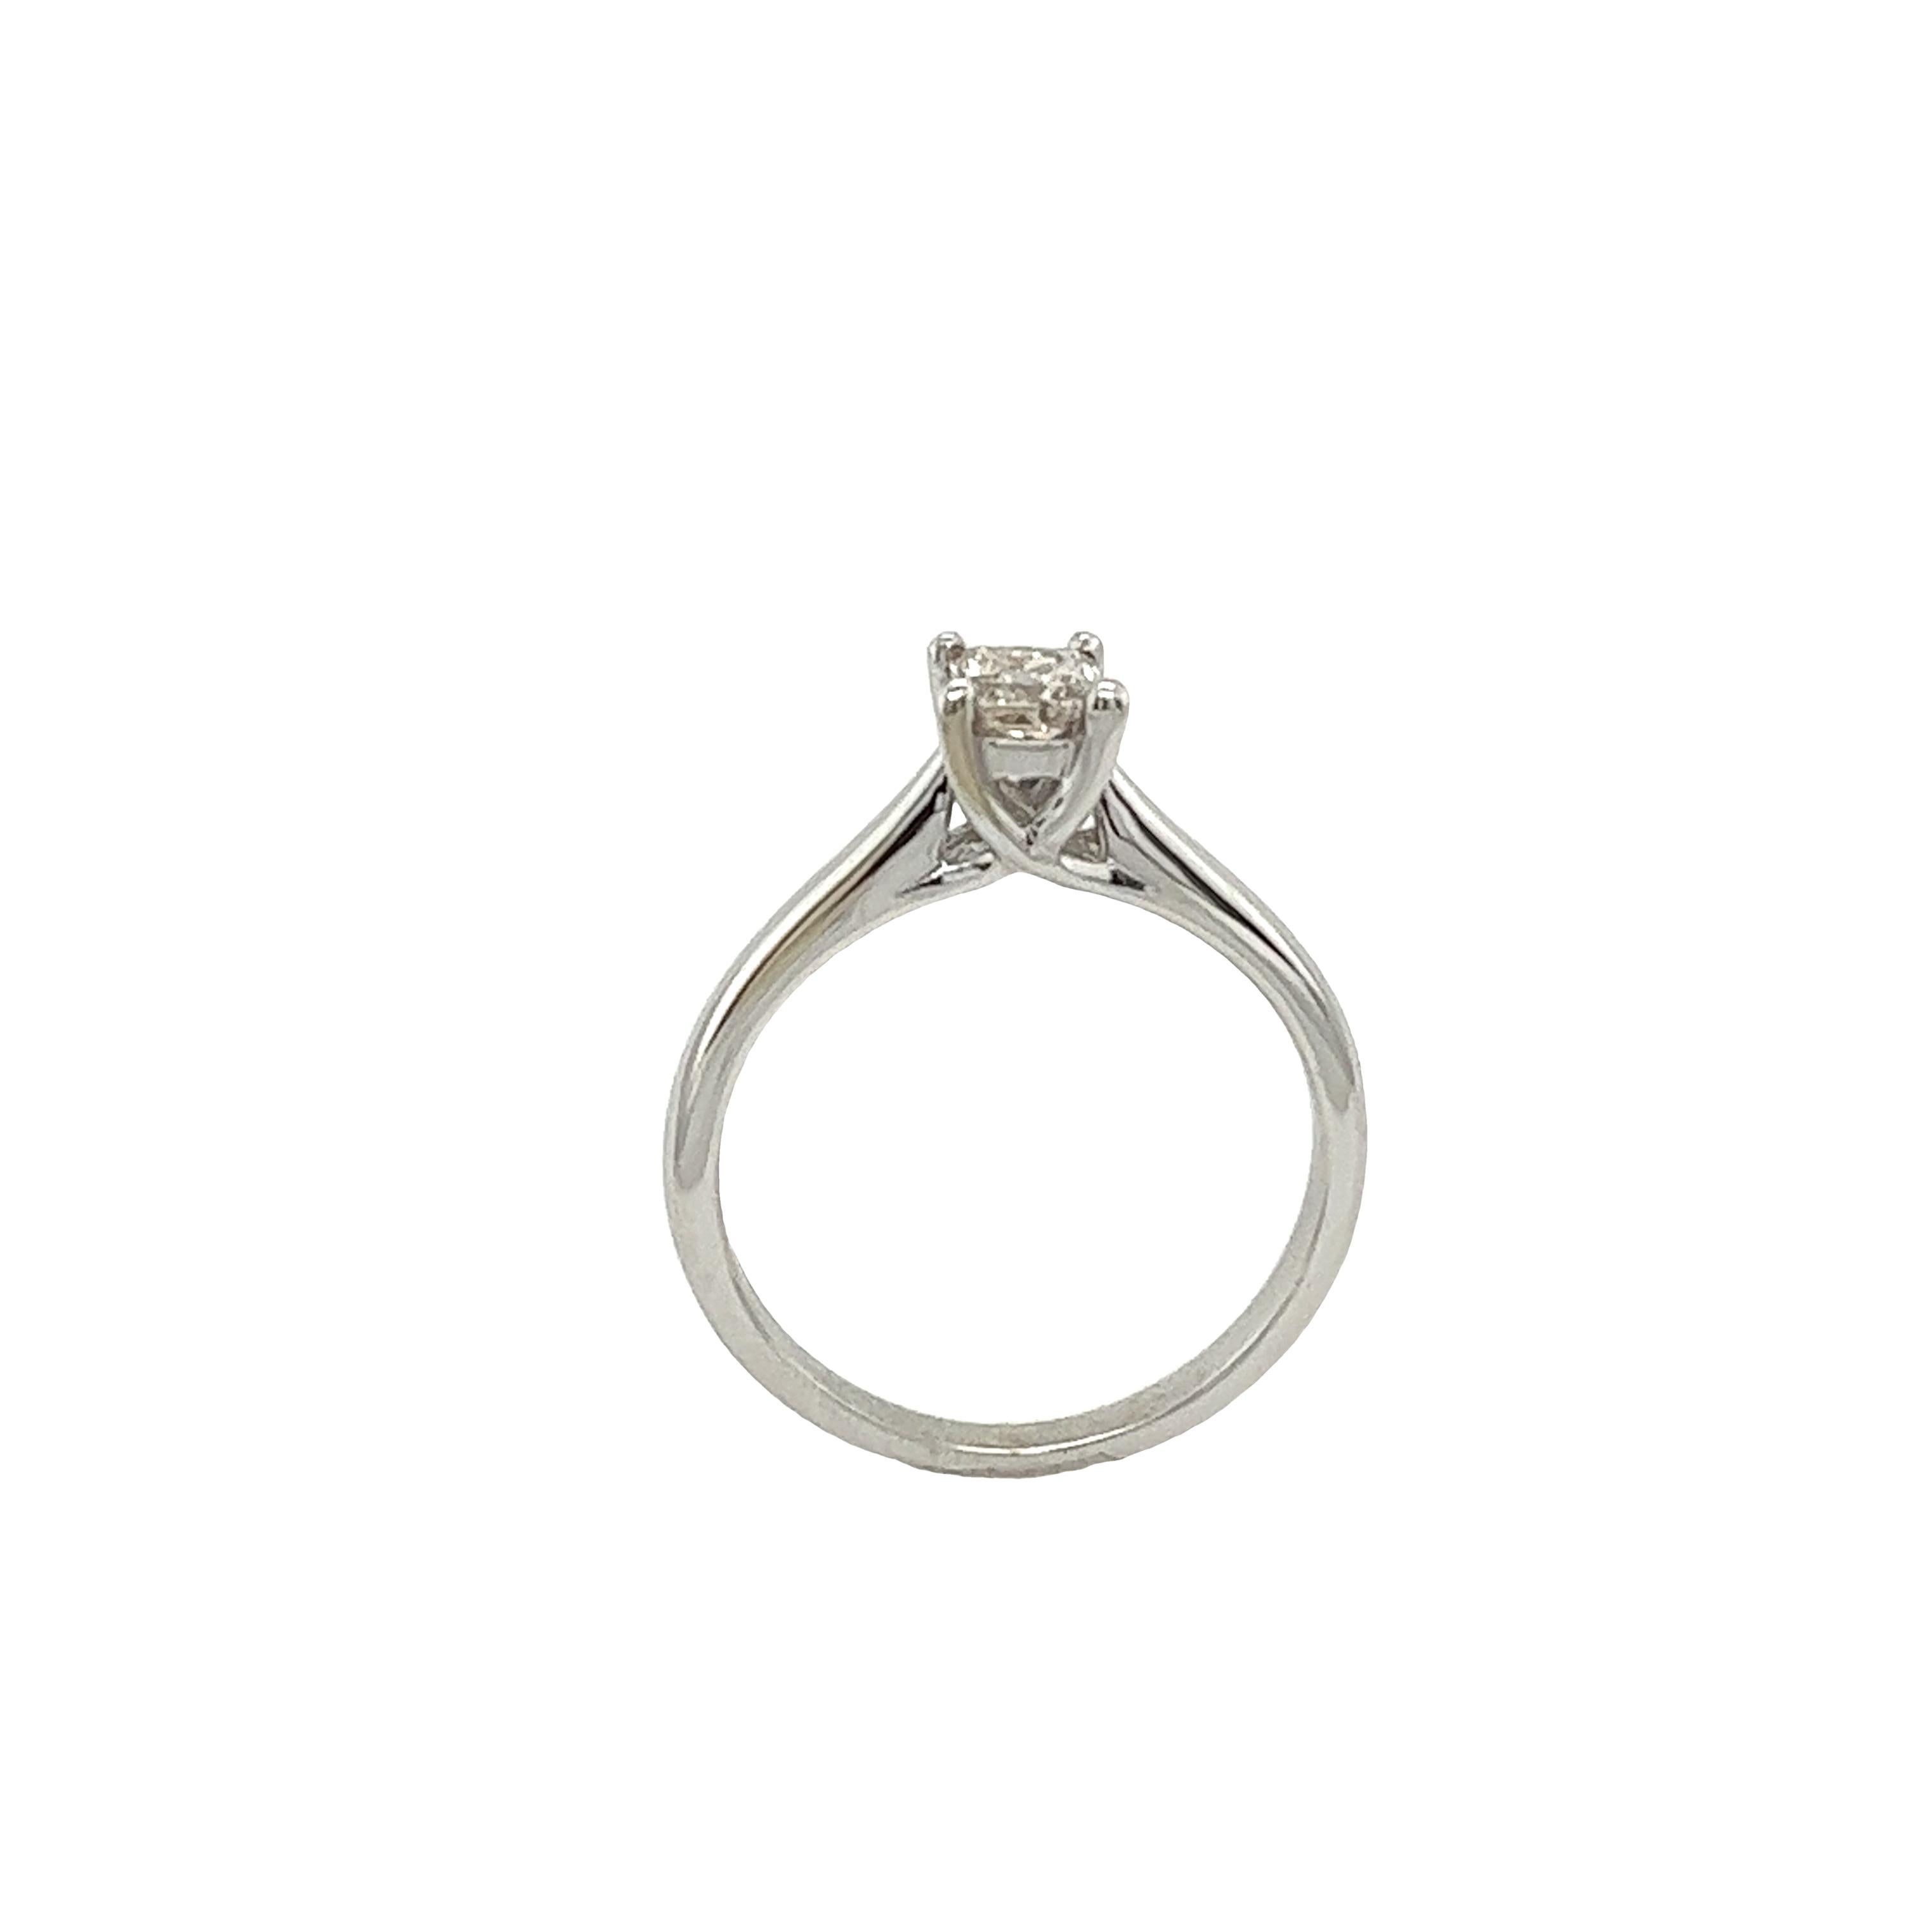 9ct White Gold Solitaire Diamond Ring Set With 0.40ct Princess Cut Diamond For Sale 1